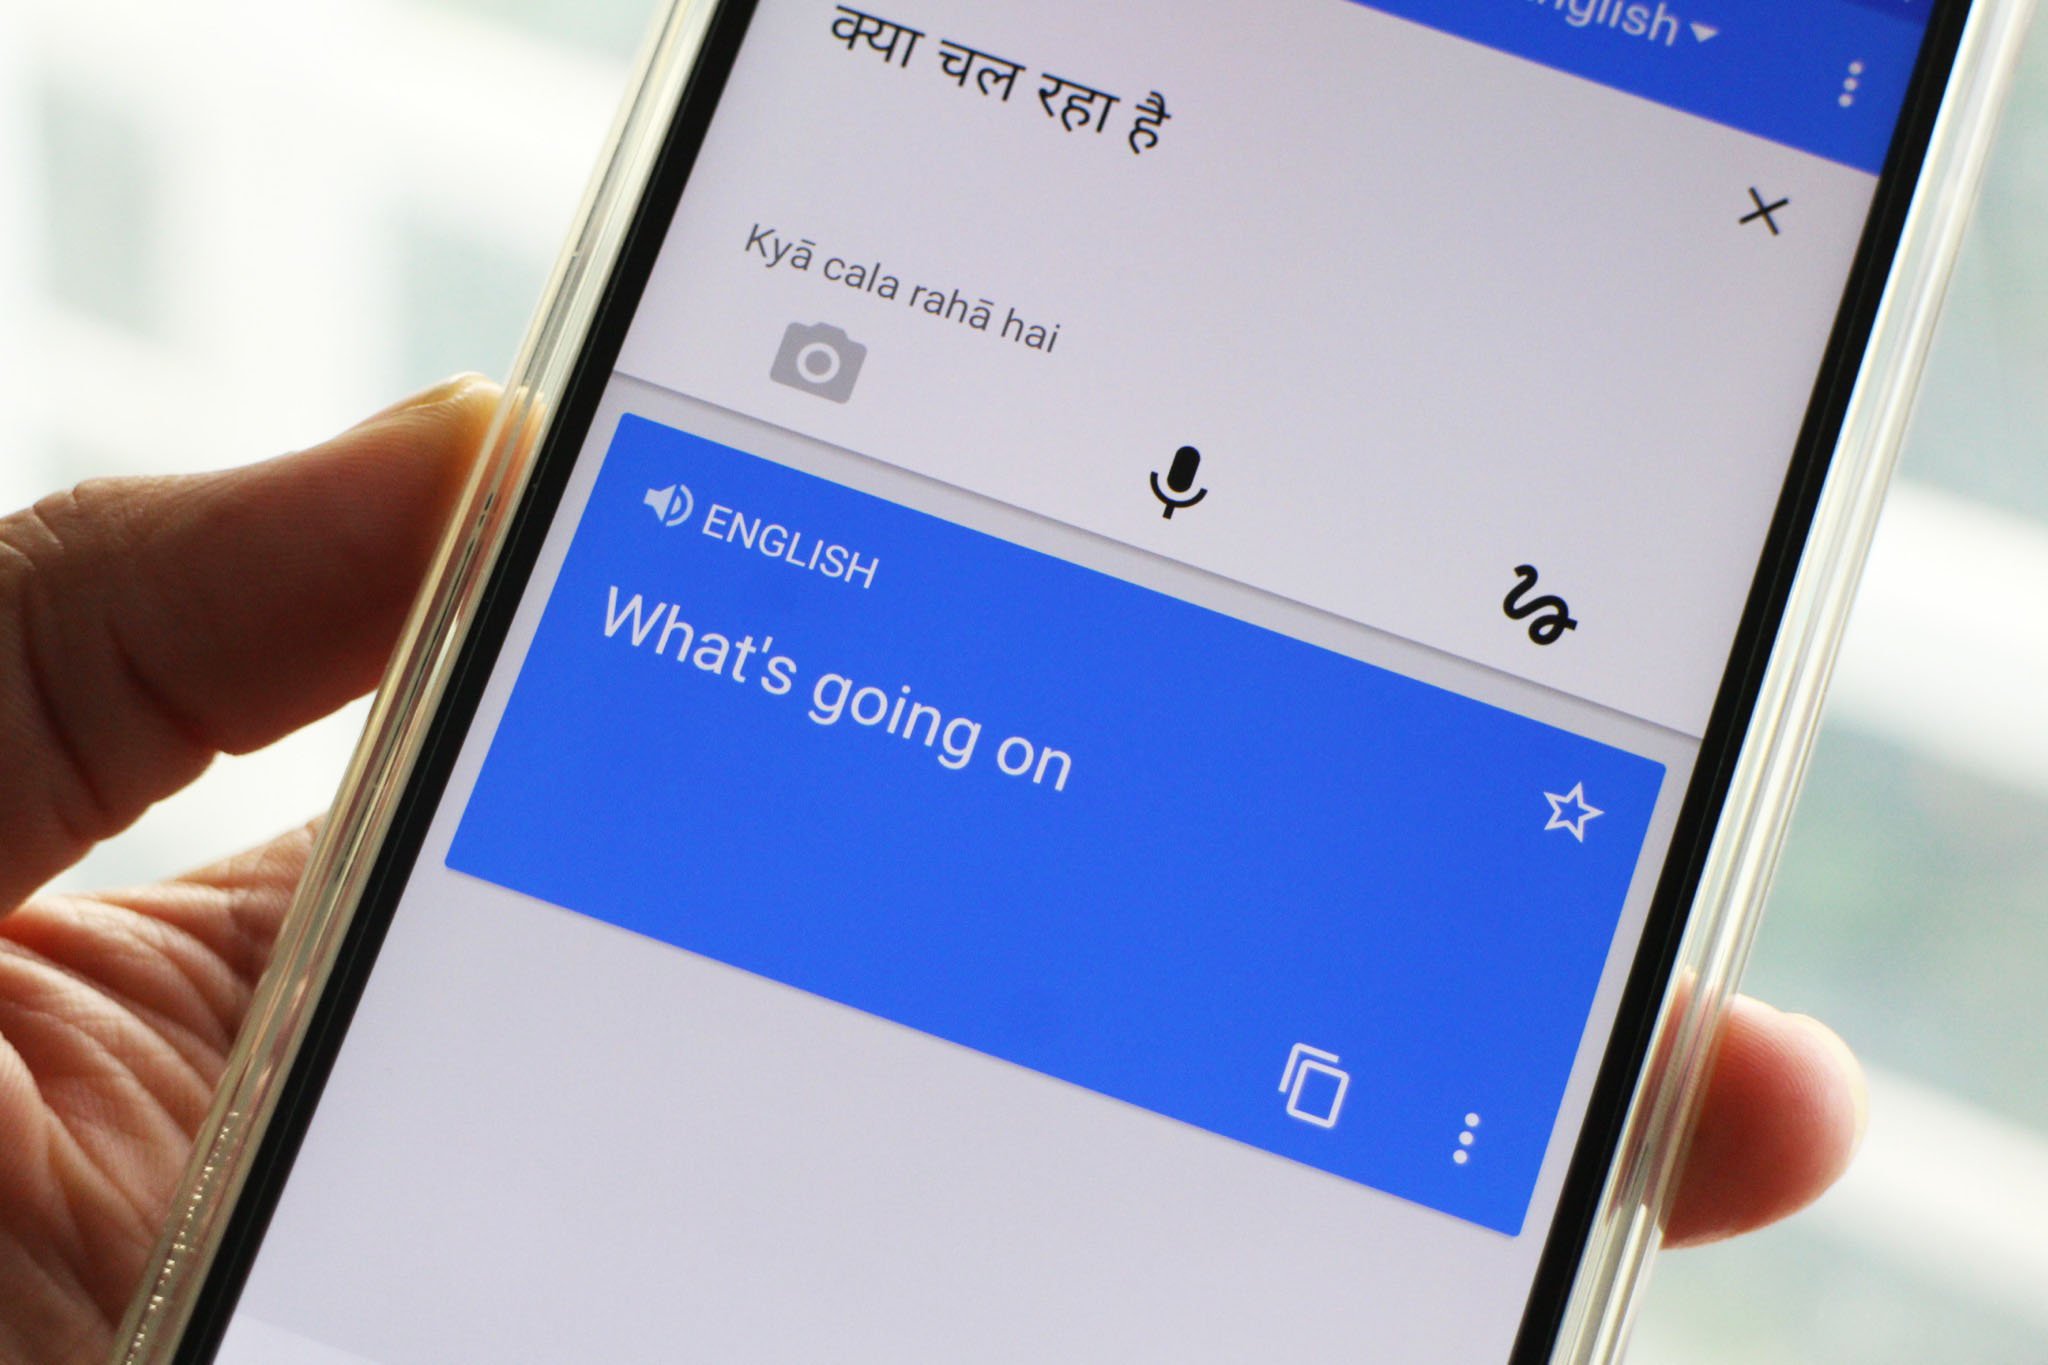 How to save a transcript in the Google Translate app on Android